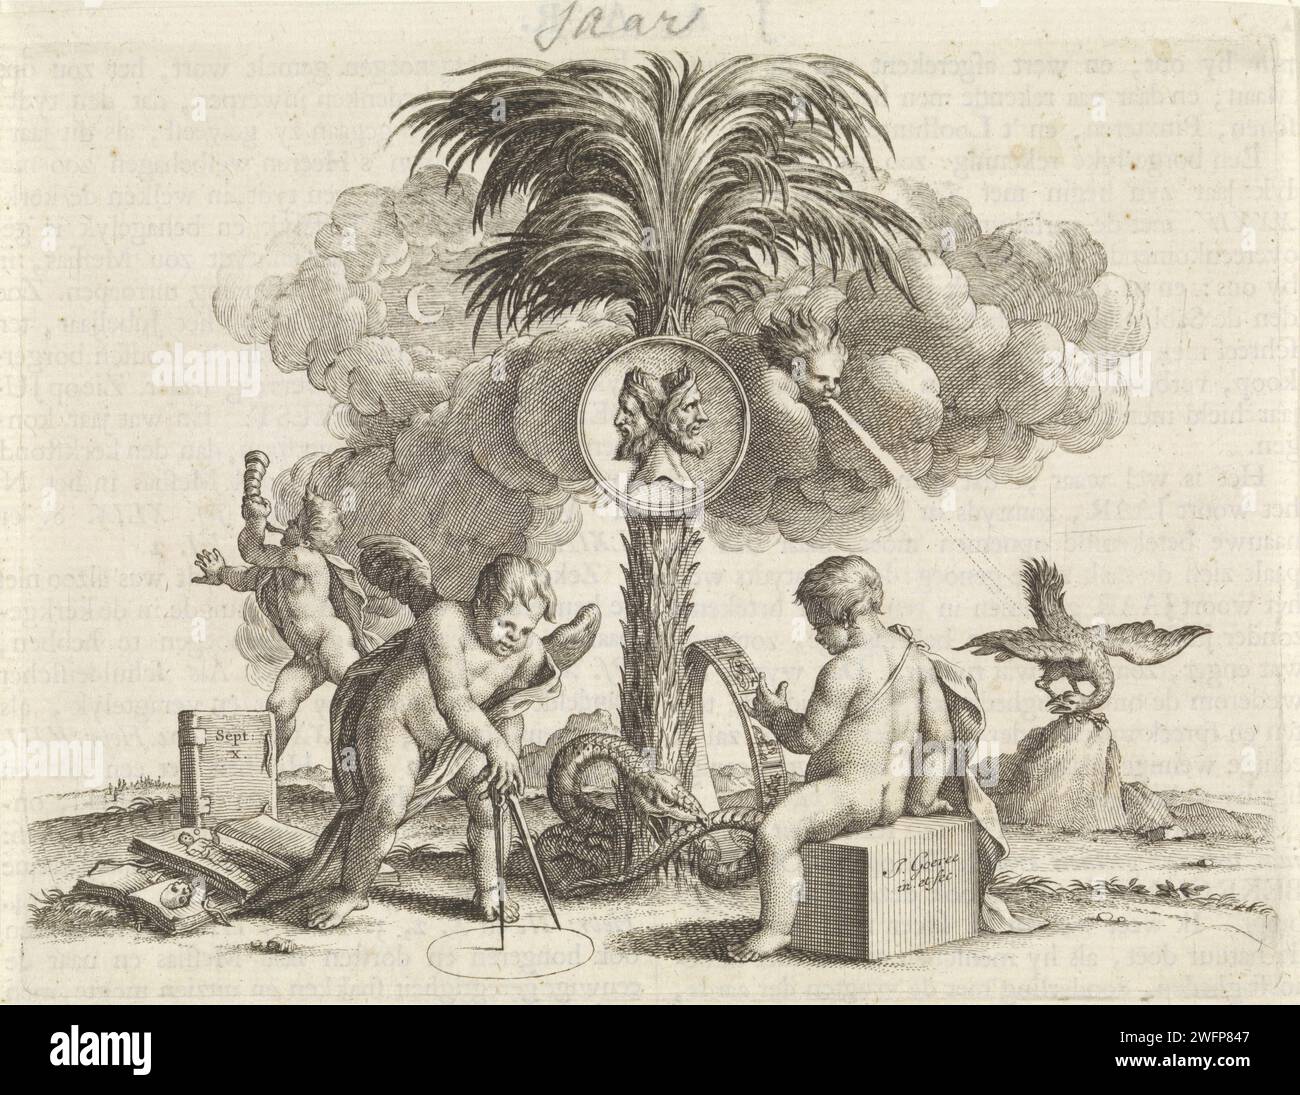 Emblem: Year, Jan Goeree, 1723 print In the middle a palm tree (symbol for the annual swing) with a medallion with the god Janus, the Roman god of the past and the future. The snake Ouroboros (symbol for eternity) turned around the tribe of the palm tree. At the foot of the palm tree the astrological zodiac. In the foreground two putti. A putto draws a circle on the floor with a passer. In the background a vulture that can be fertilized by the wind. print maker: Amsterdampublisher: Amsterdampublisher: Dordrecht paper engraving serpent Ouroboros. circle ( planimetry, geometry). predatory birds Stock Photo